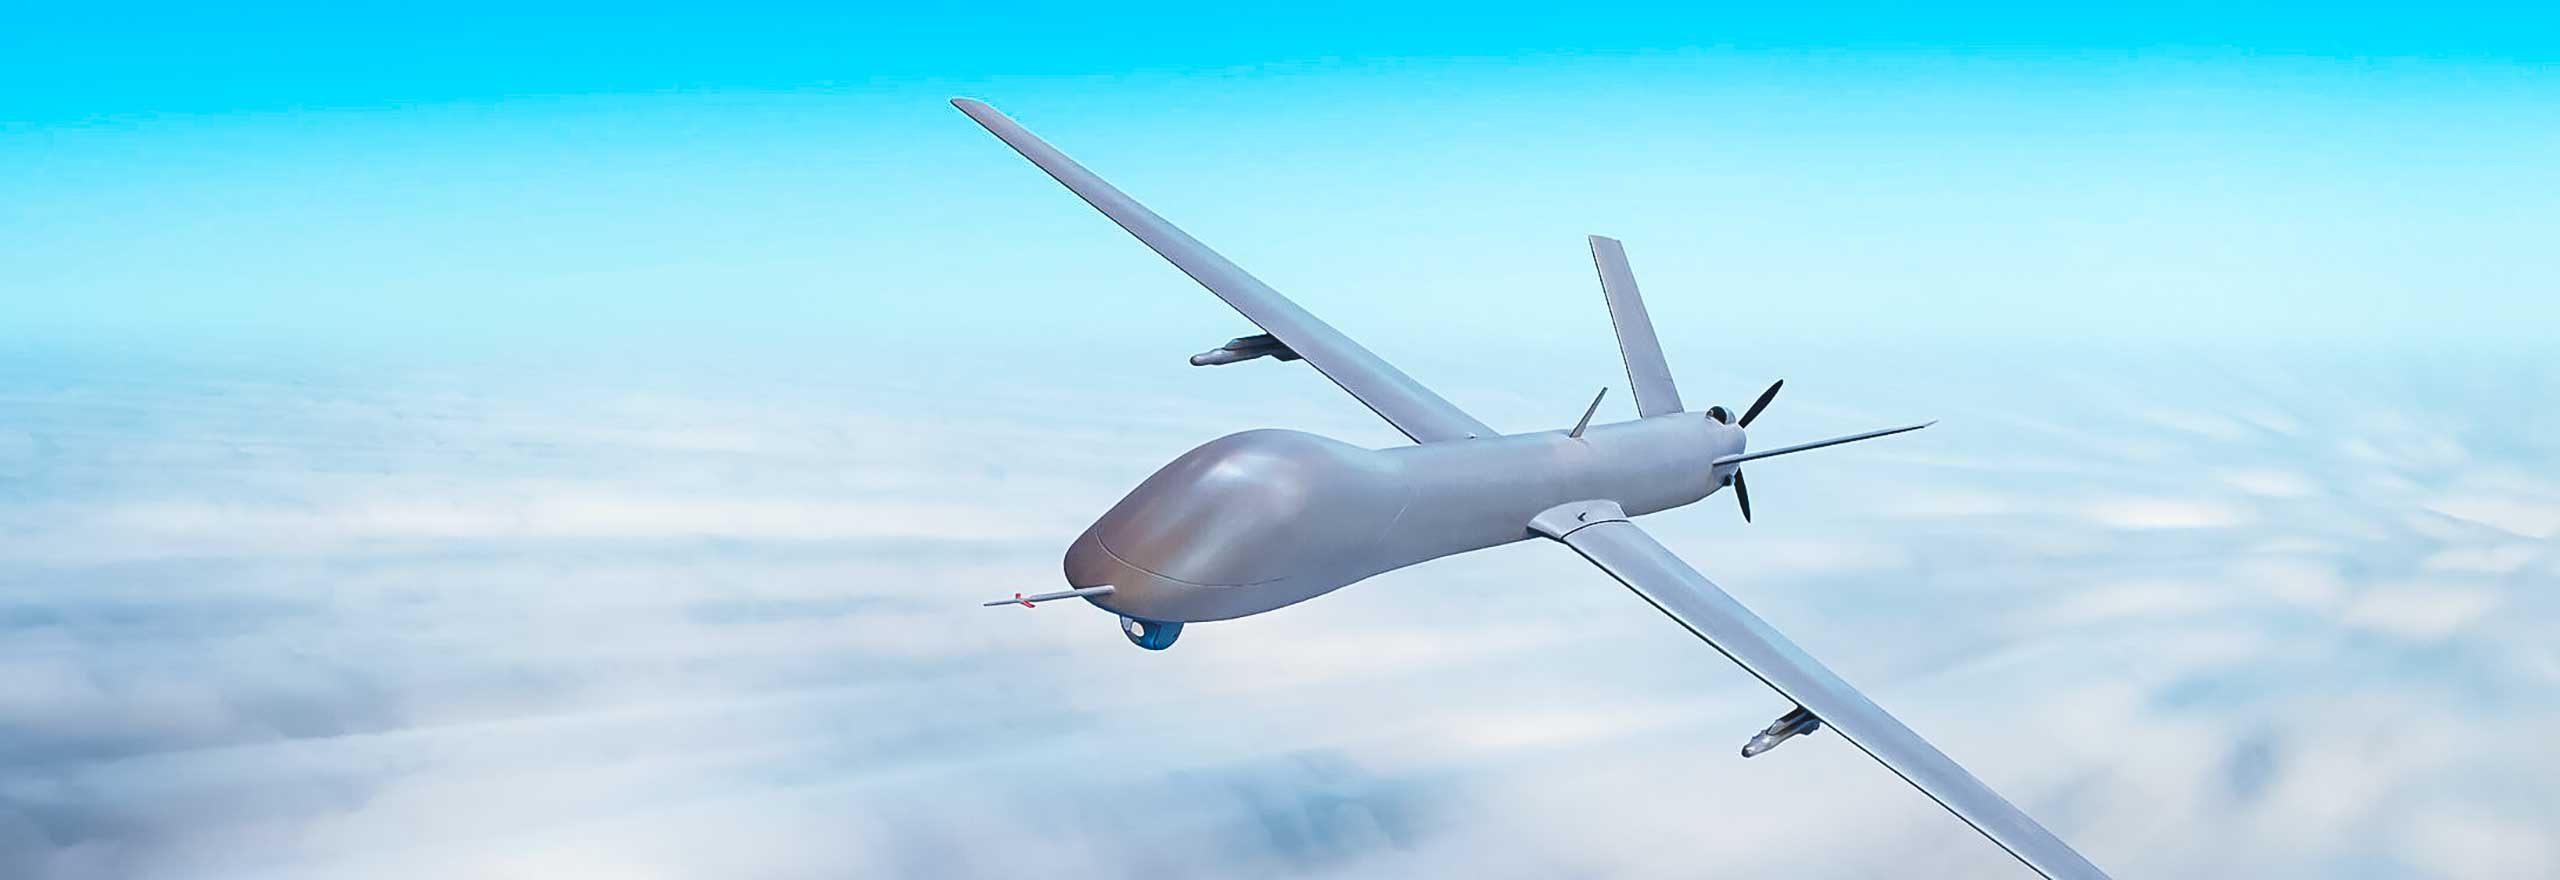 Unmanned aerial vehicle evolution and applications